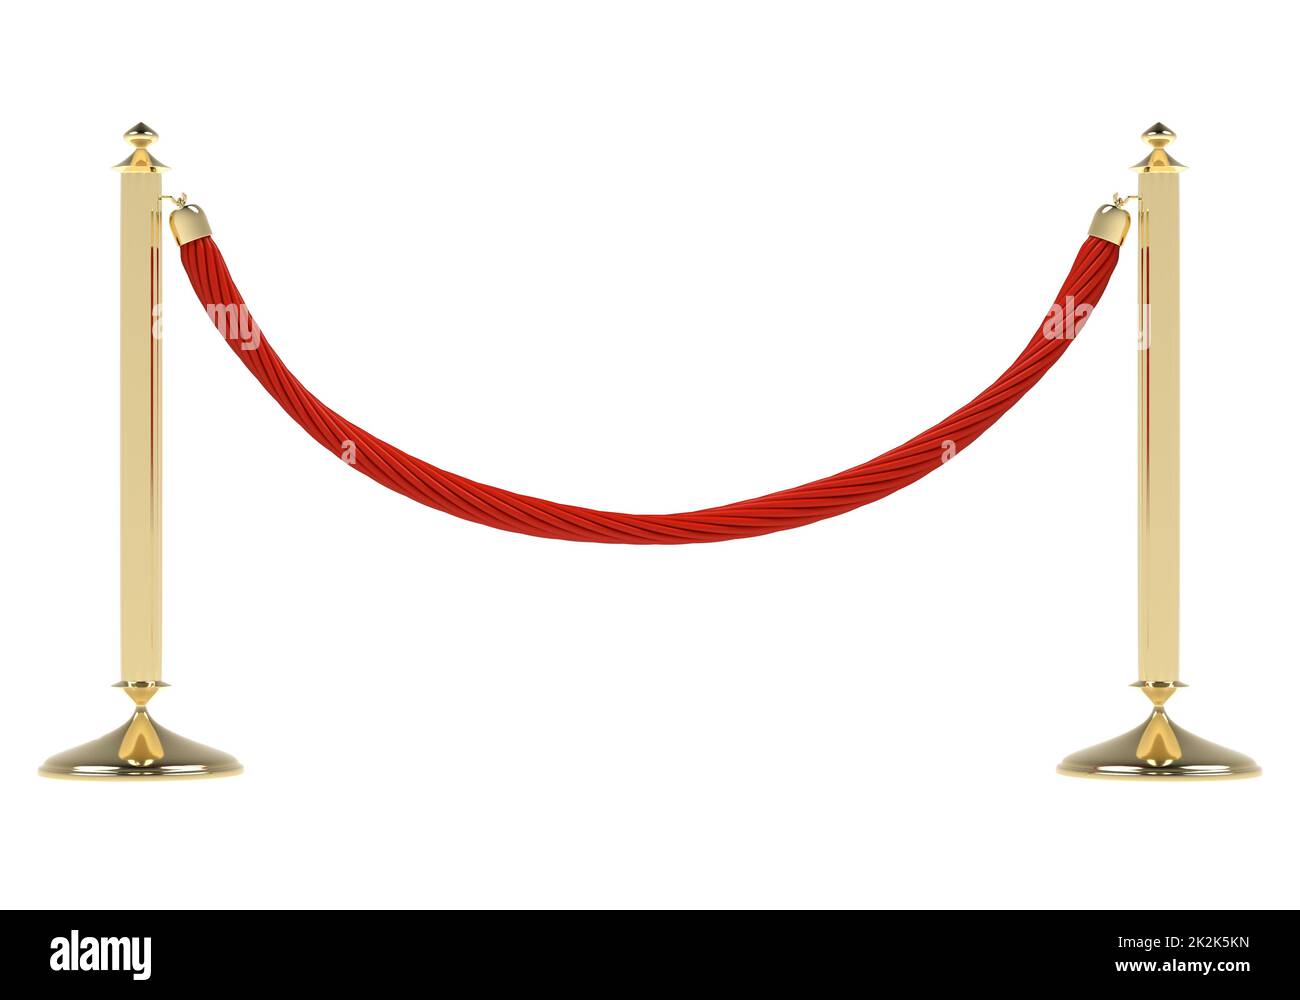 Realistic golden stanchion isolated on white background Stock Photo